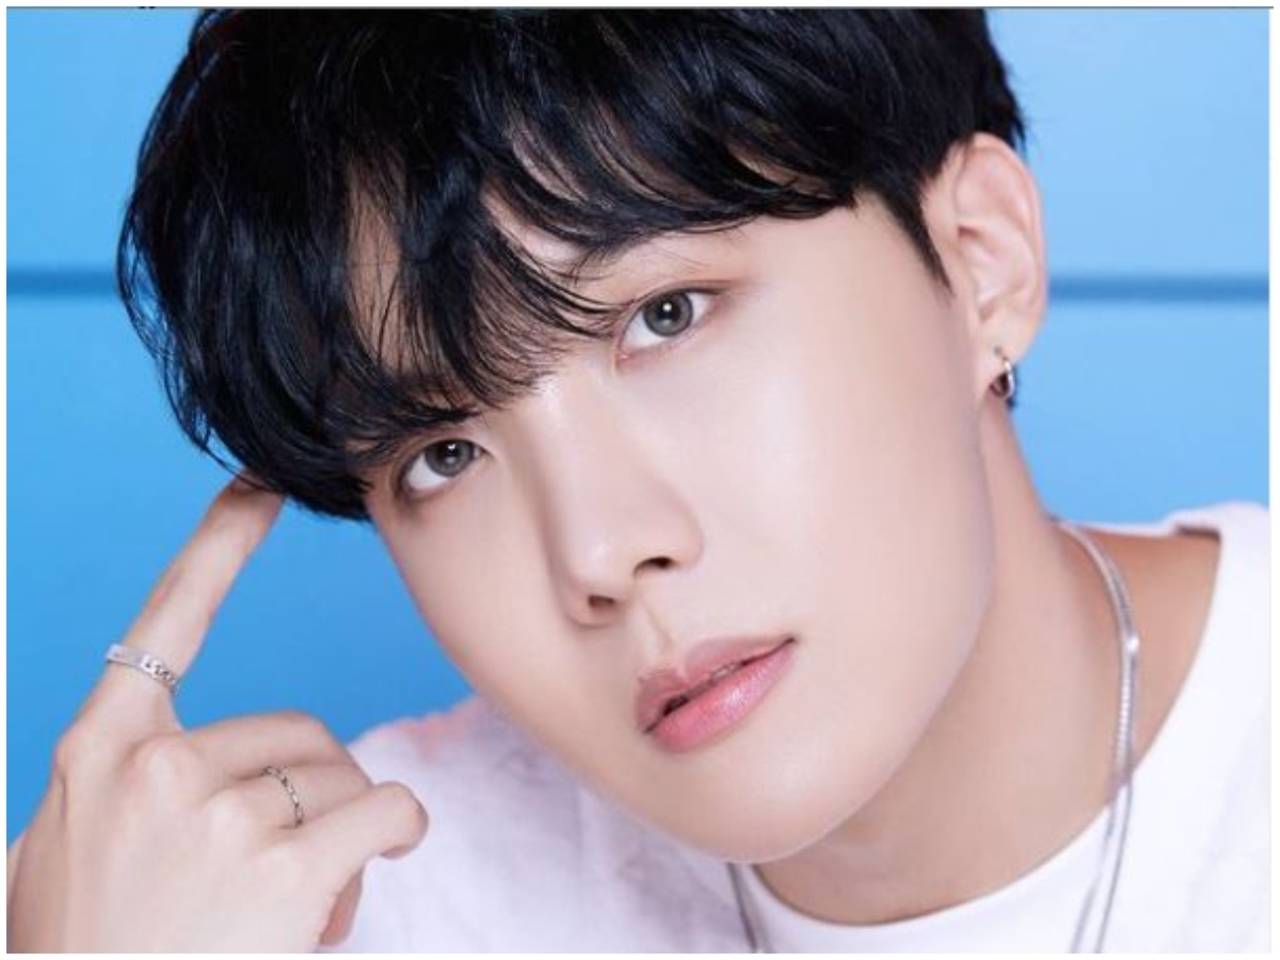 BTS' J-Hope confessed to ARMY his plans for this year 2023